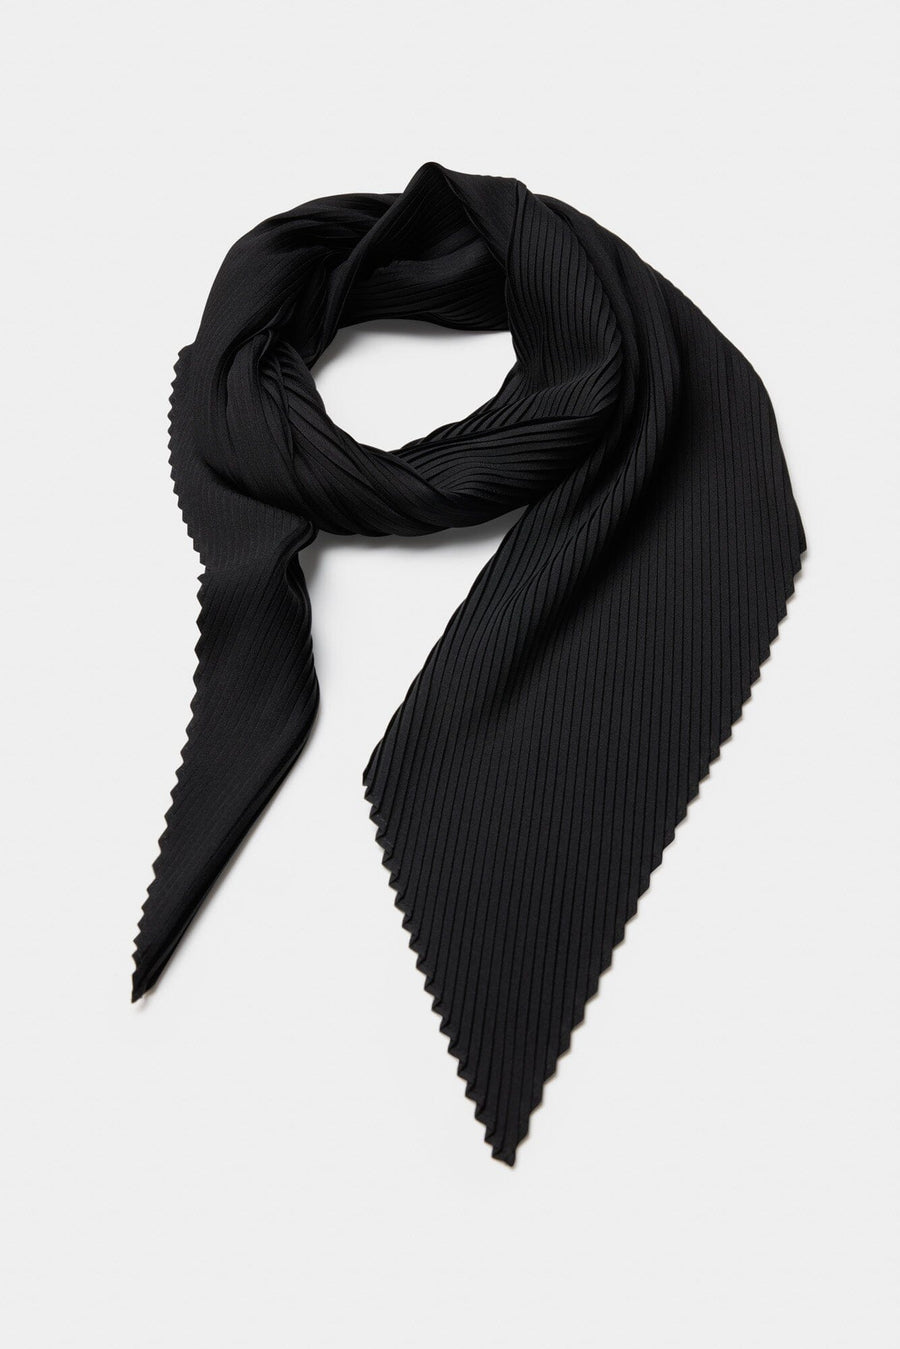 Black Bark Pleated Scarf - Late April Delivery